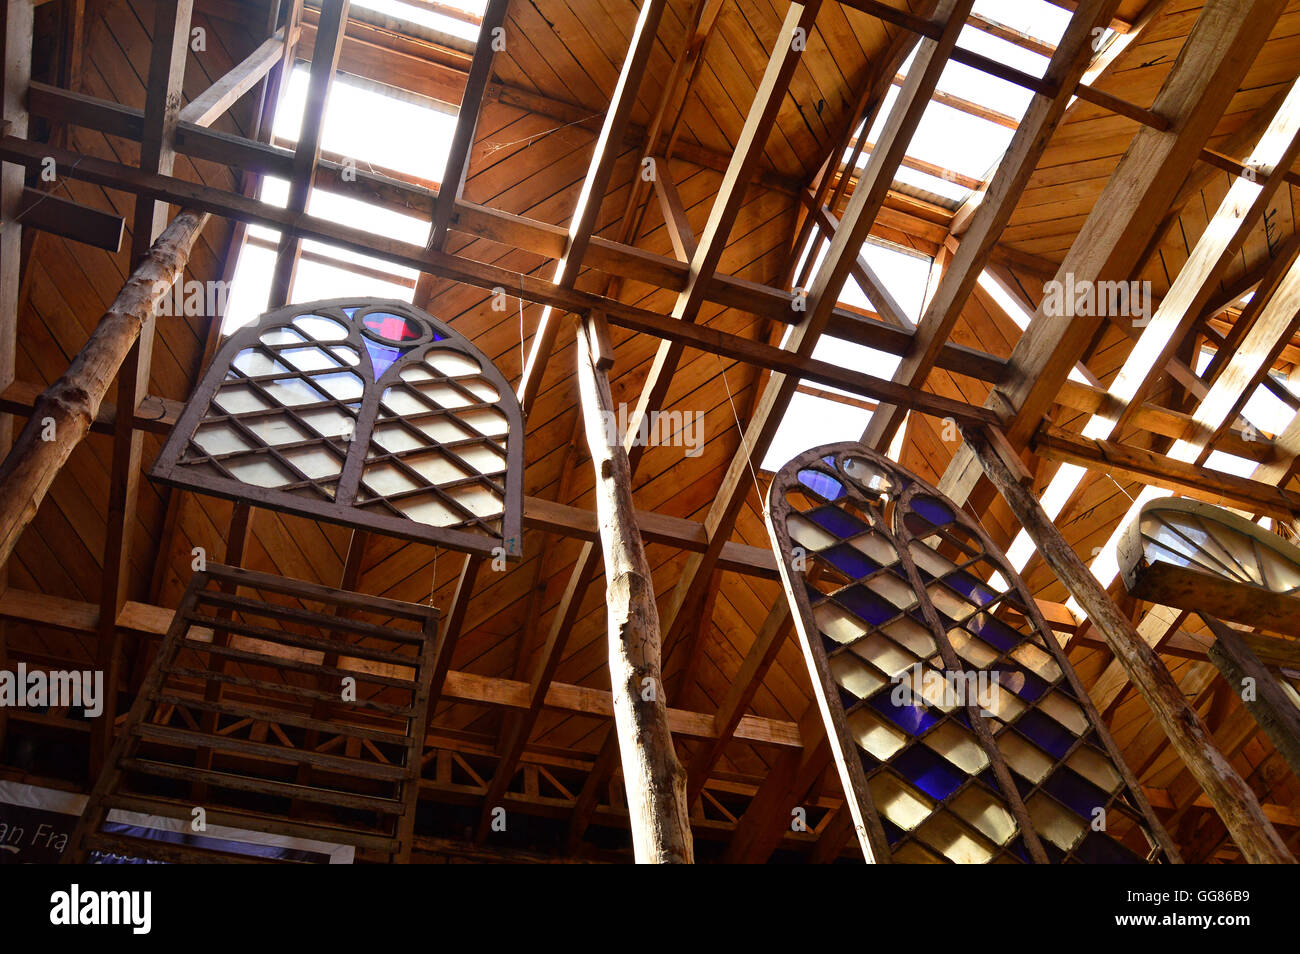 Stained glass windows and high wooden beams at the Museo de las Iglesias de Chiloe, Ancud, Chile Stock Photo